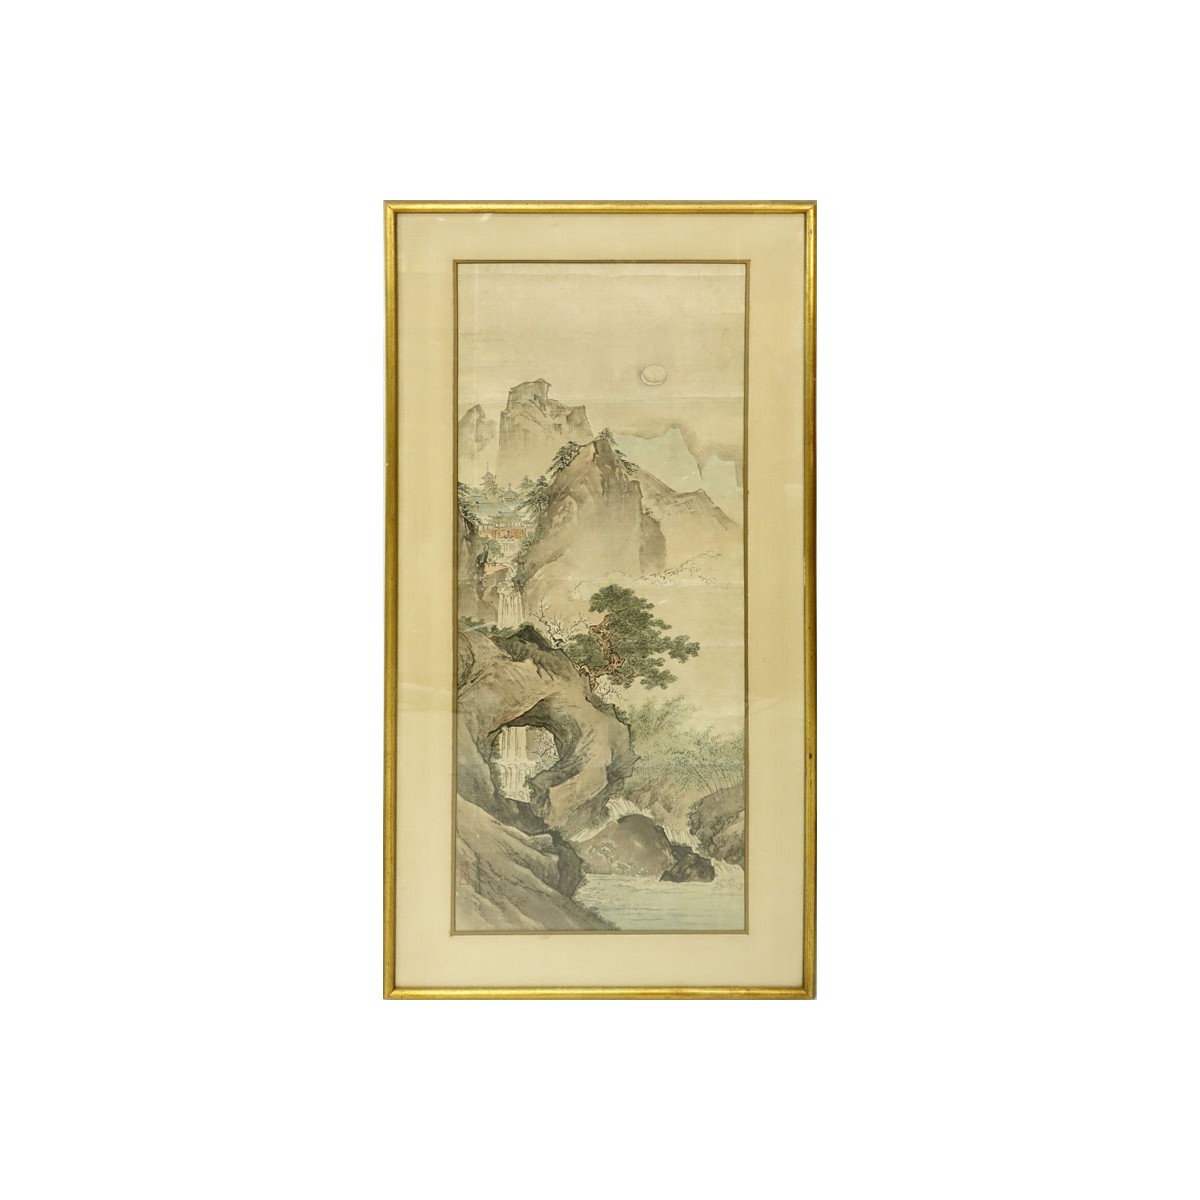 Large Antique Japanese Watercolor Scroll Painting, Landscape Scene. Signed. Toning and spotting, cr